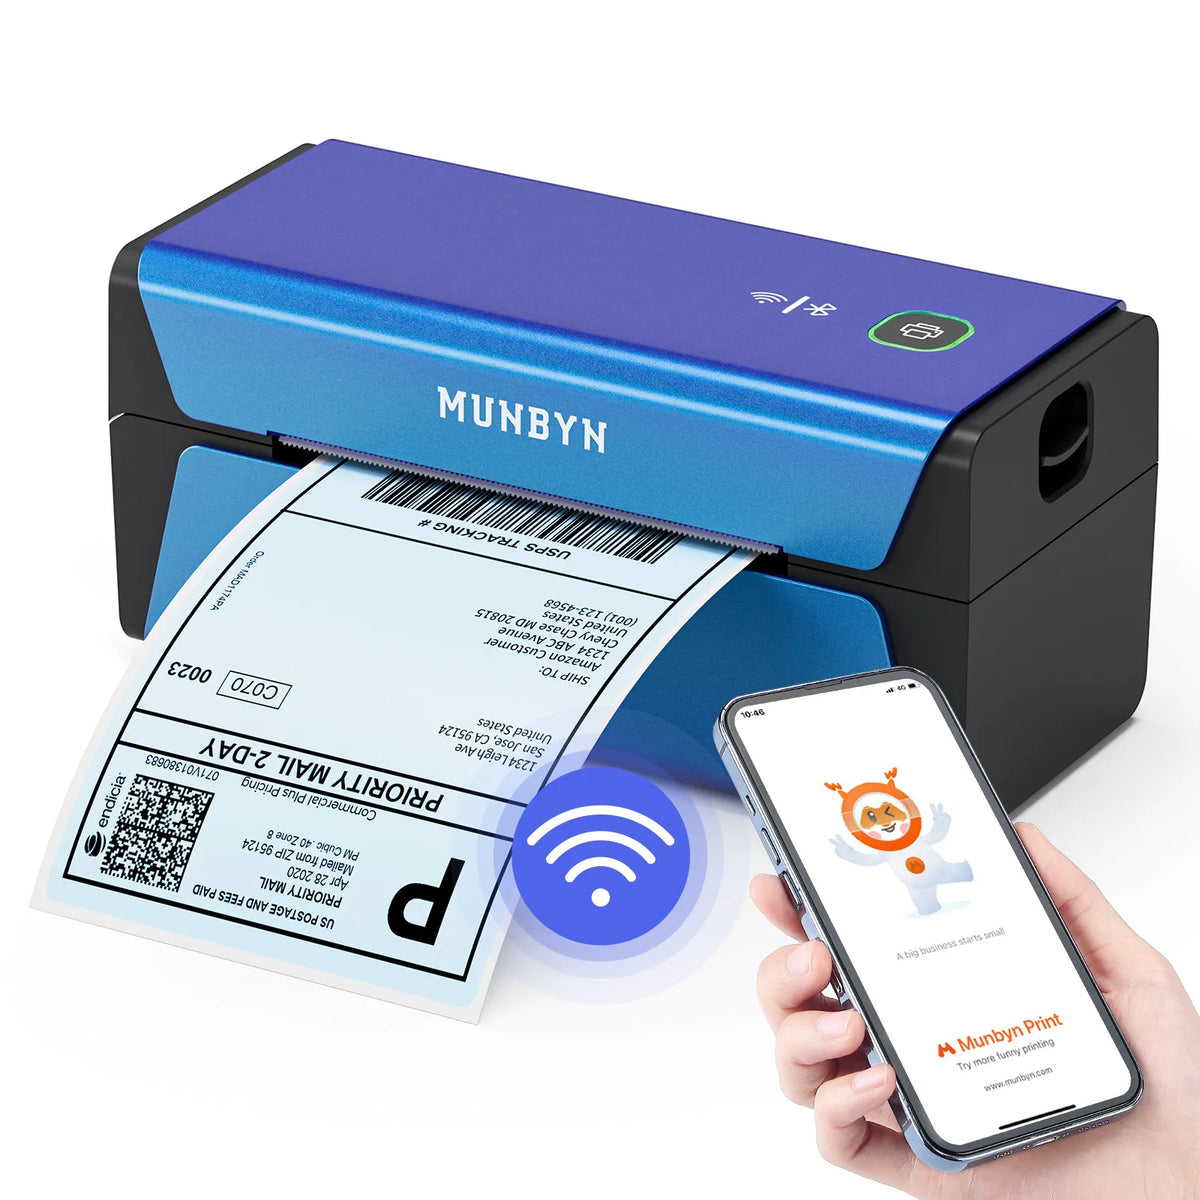 MUNBYN Voice Controlled Wireless Thermal Label Printer P44S connects to mobile phones using WiFi.